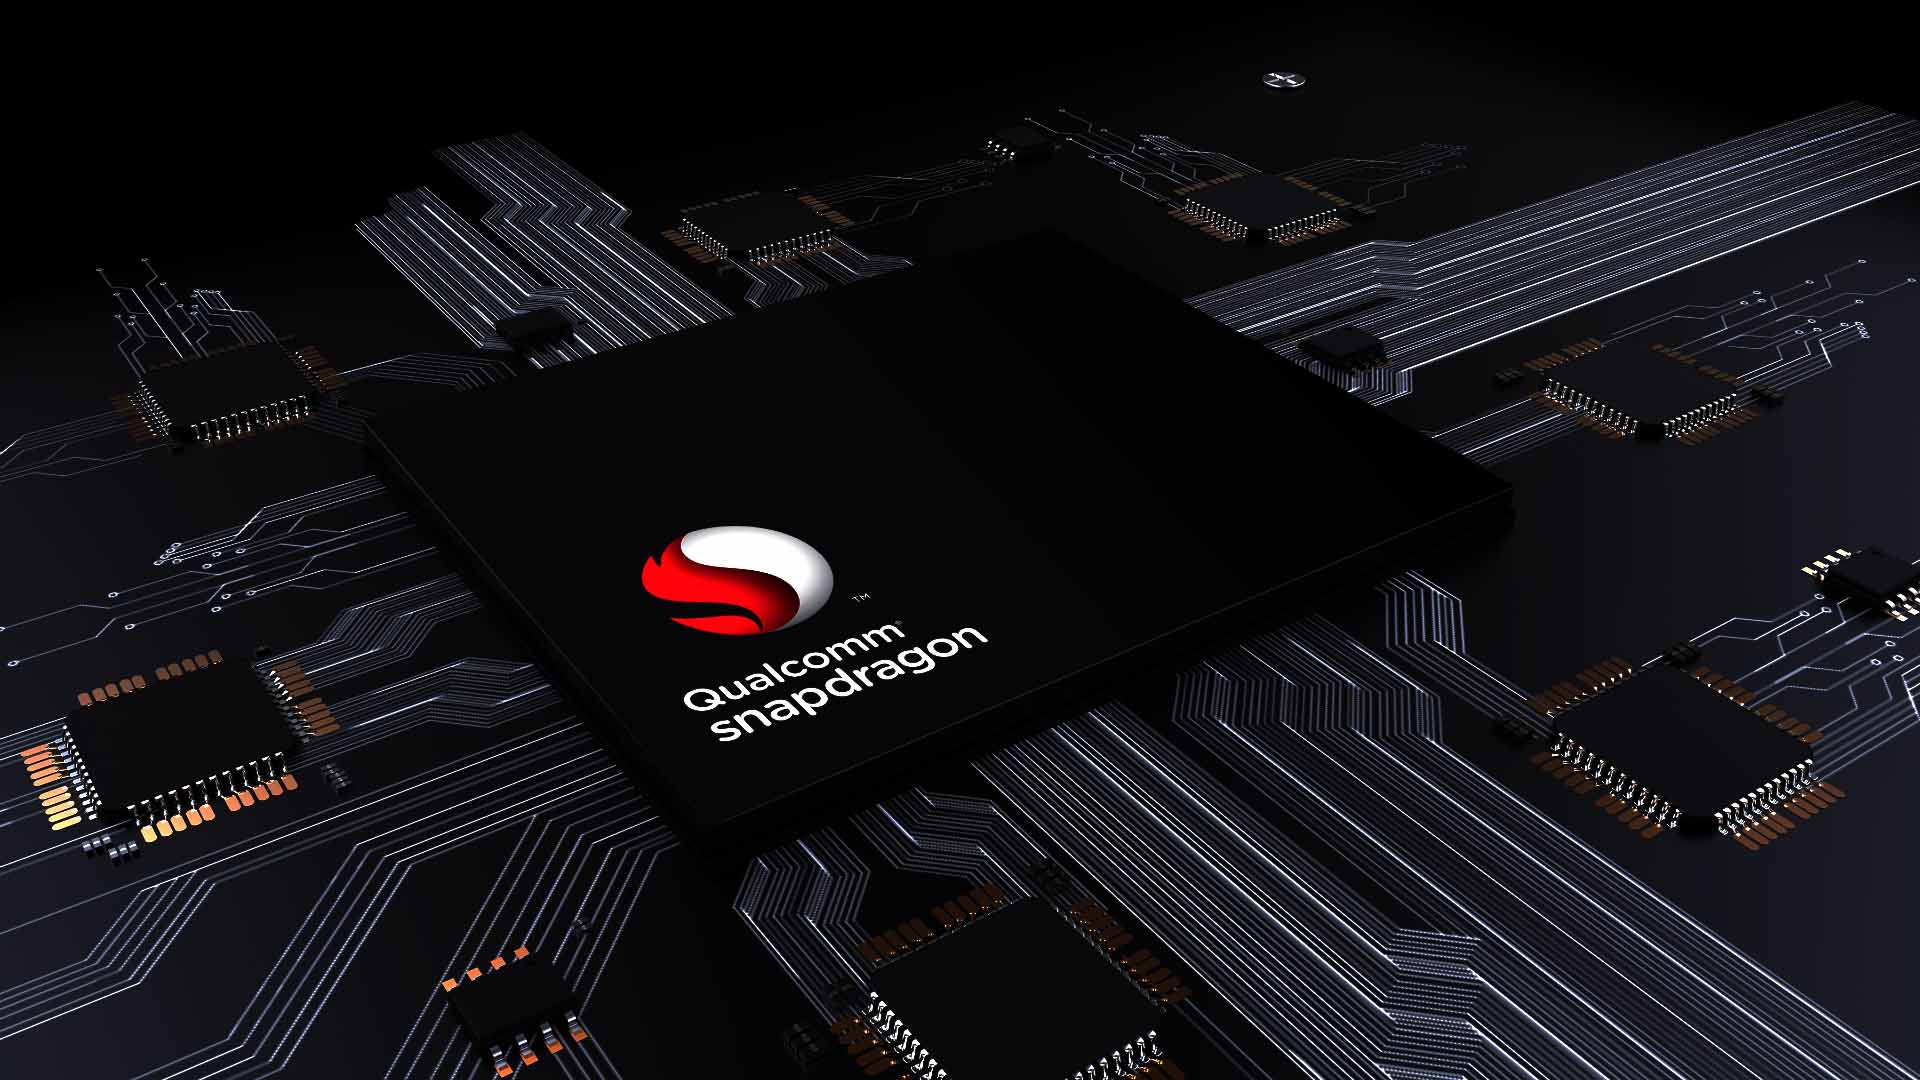 Qualcomm 7nm SoC to be ready this year for 5G hotspots